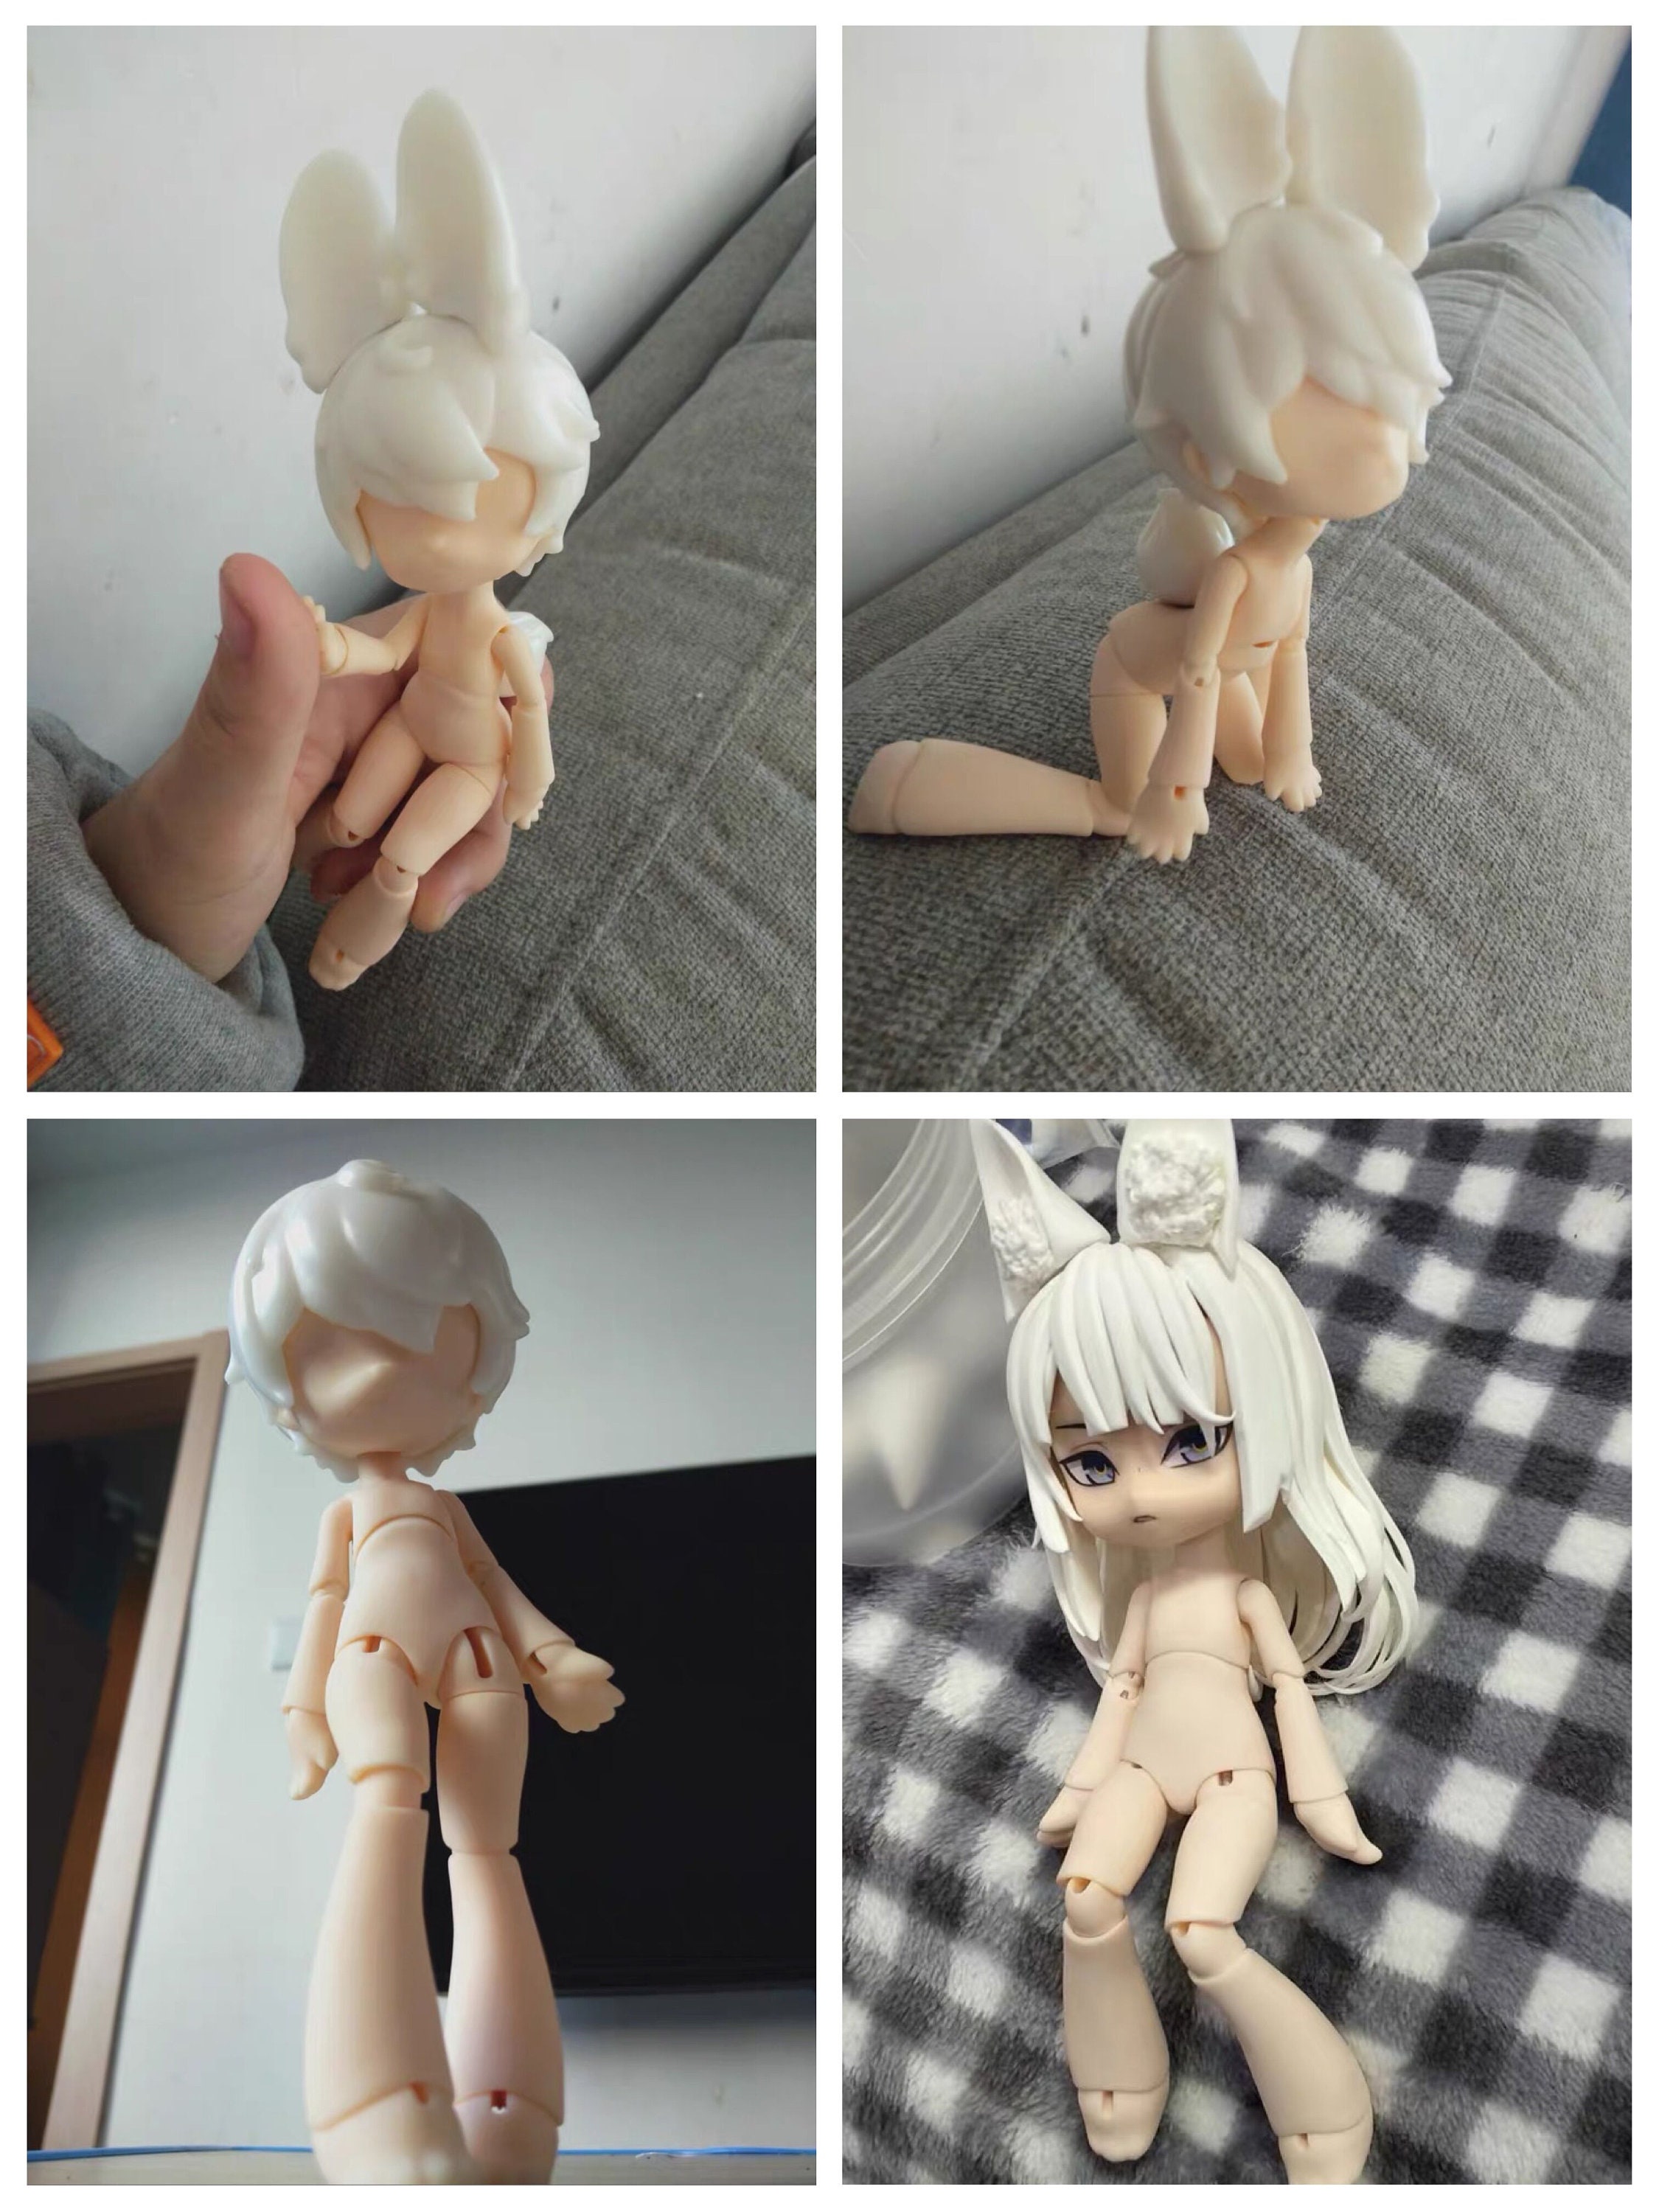 Cheap XiDonDon UFDoll 1/12 Body for GSC, STO Head 1 / 12bjd Ball Jointed  Doll Obitsu 11 Replacement Body Doll Body Accessory Toy